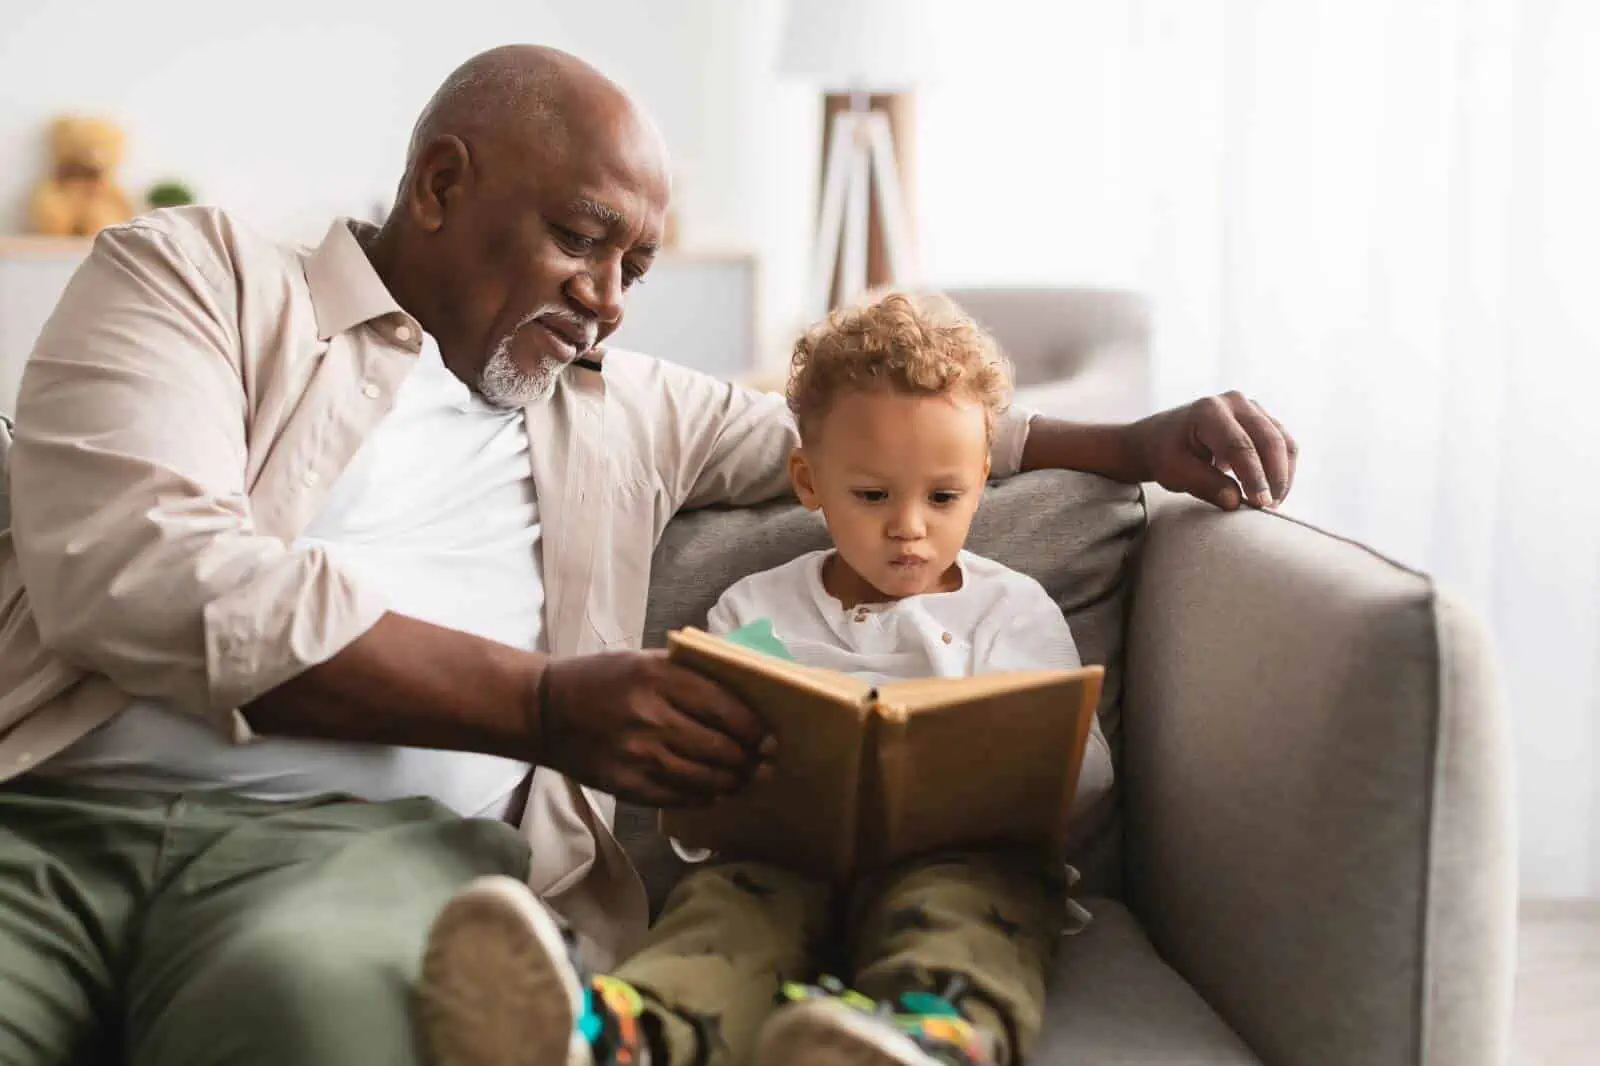 Grandfather helping grandson to read a book